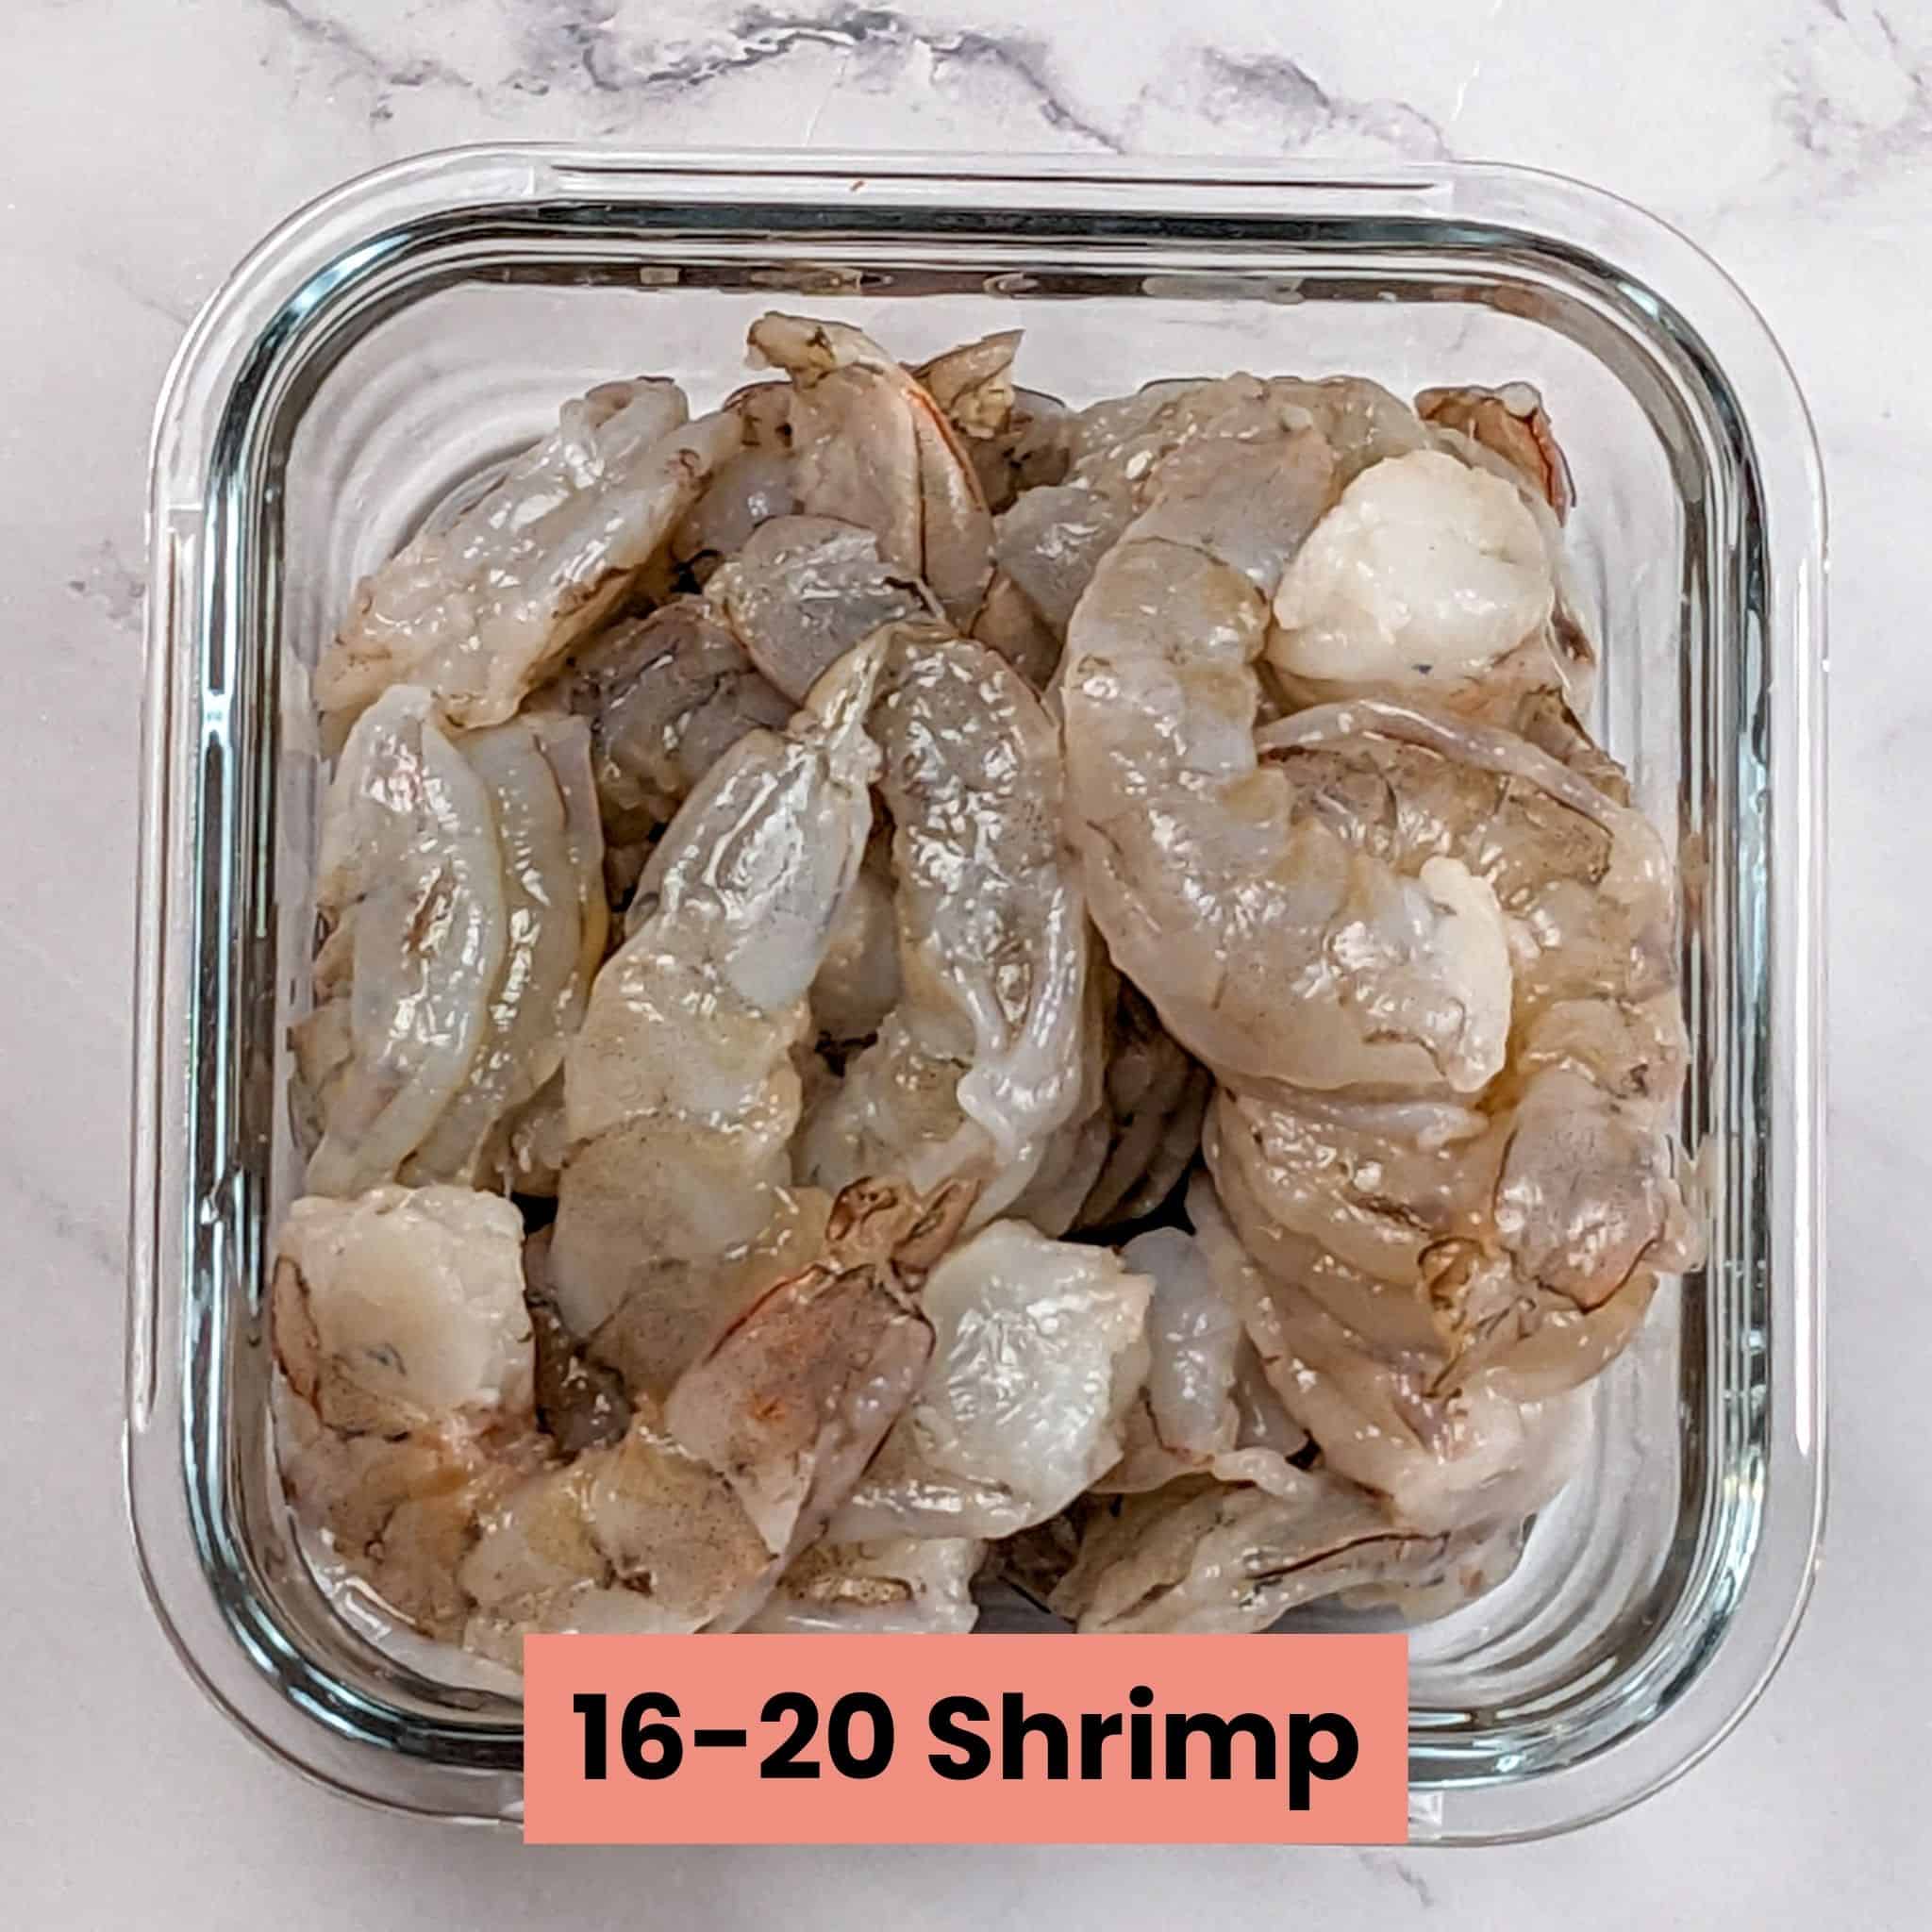 peeled and deveined shrimp in a square glass container.